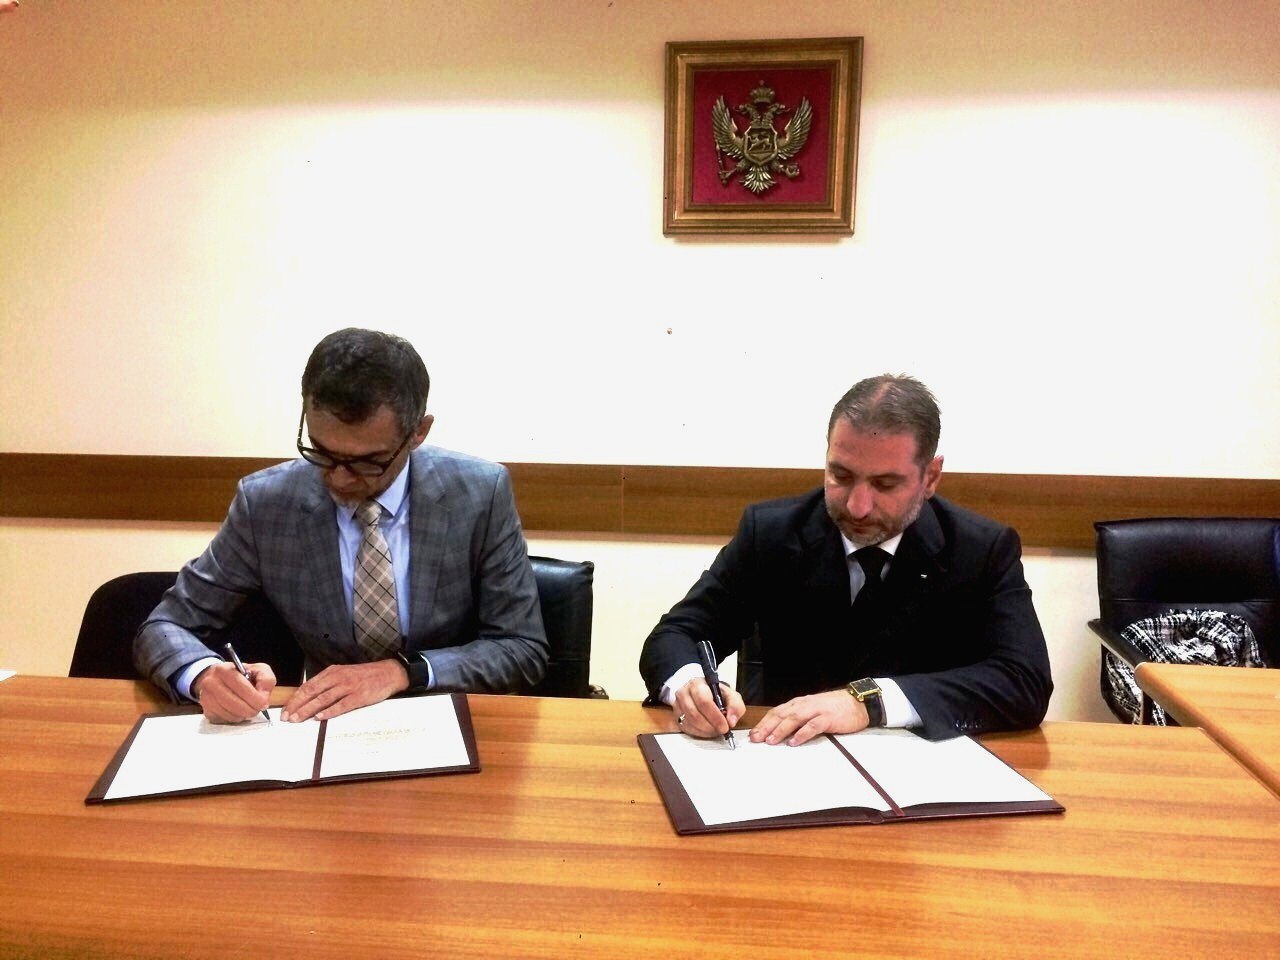 ENERGY REGULATORY AGENCY OF MONTENEGRO (REGAGEN) AND ENERGY AND WATER REGULATORY COMMISSION OF THE REPUBLIC OF BULGARIA (EWRC) SIGNED AN AGREEMENT FOR COOPERATION